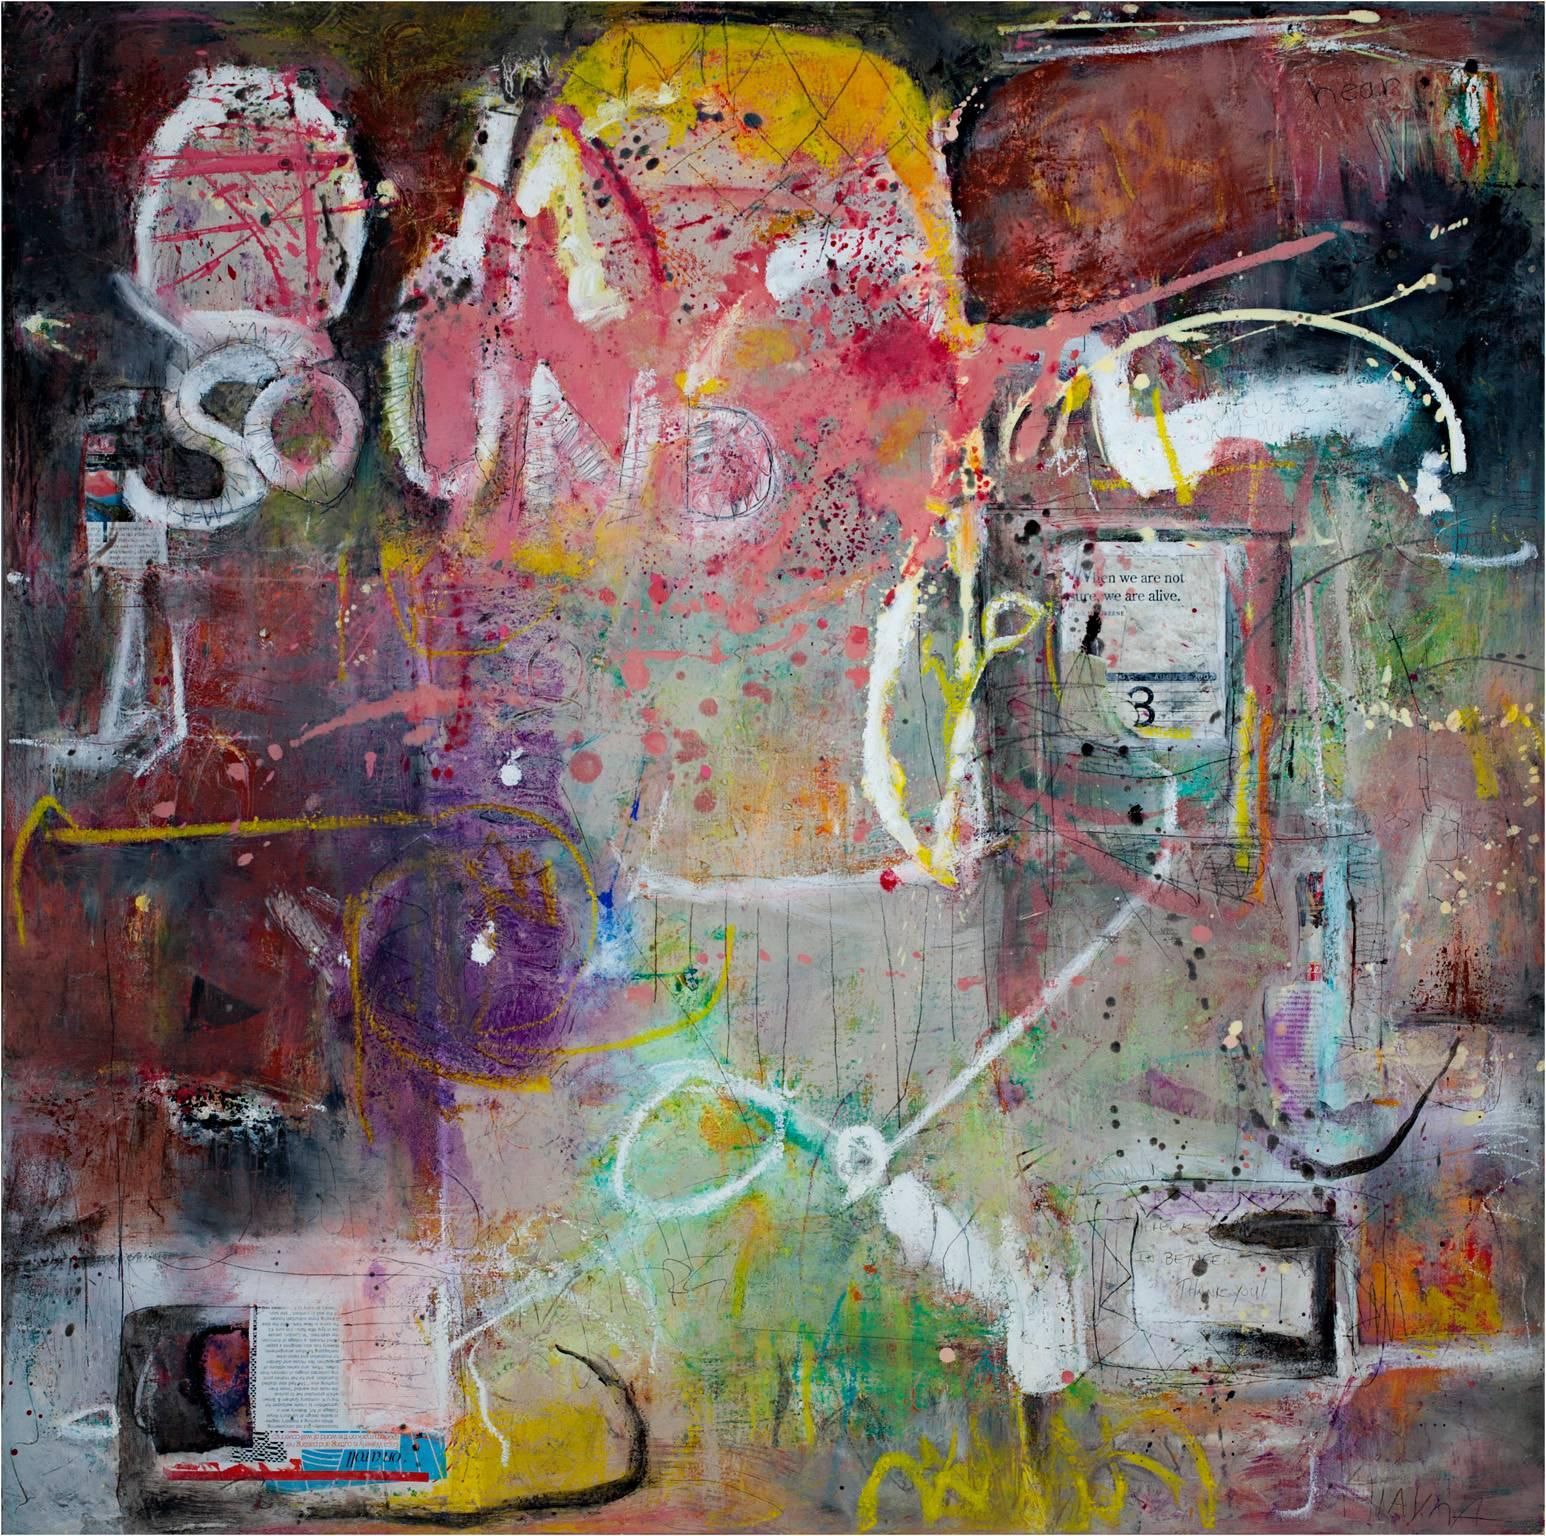 "Sound" Mixed Media abstract signed dada text grunge graffiti expressionist bold